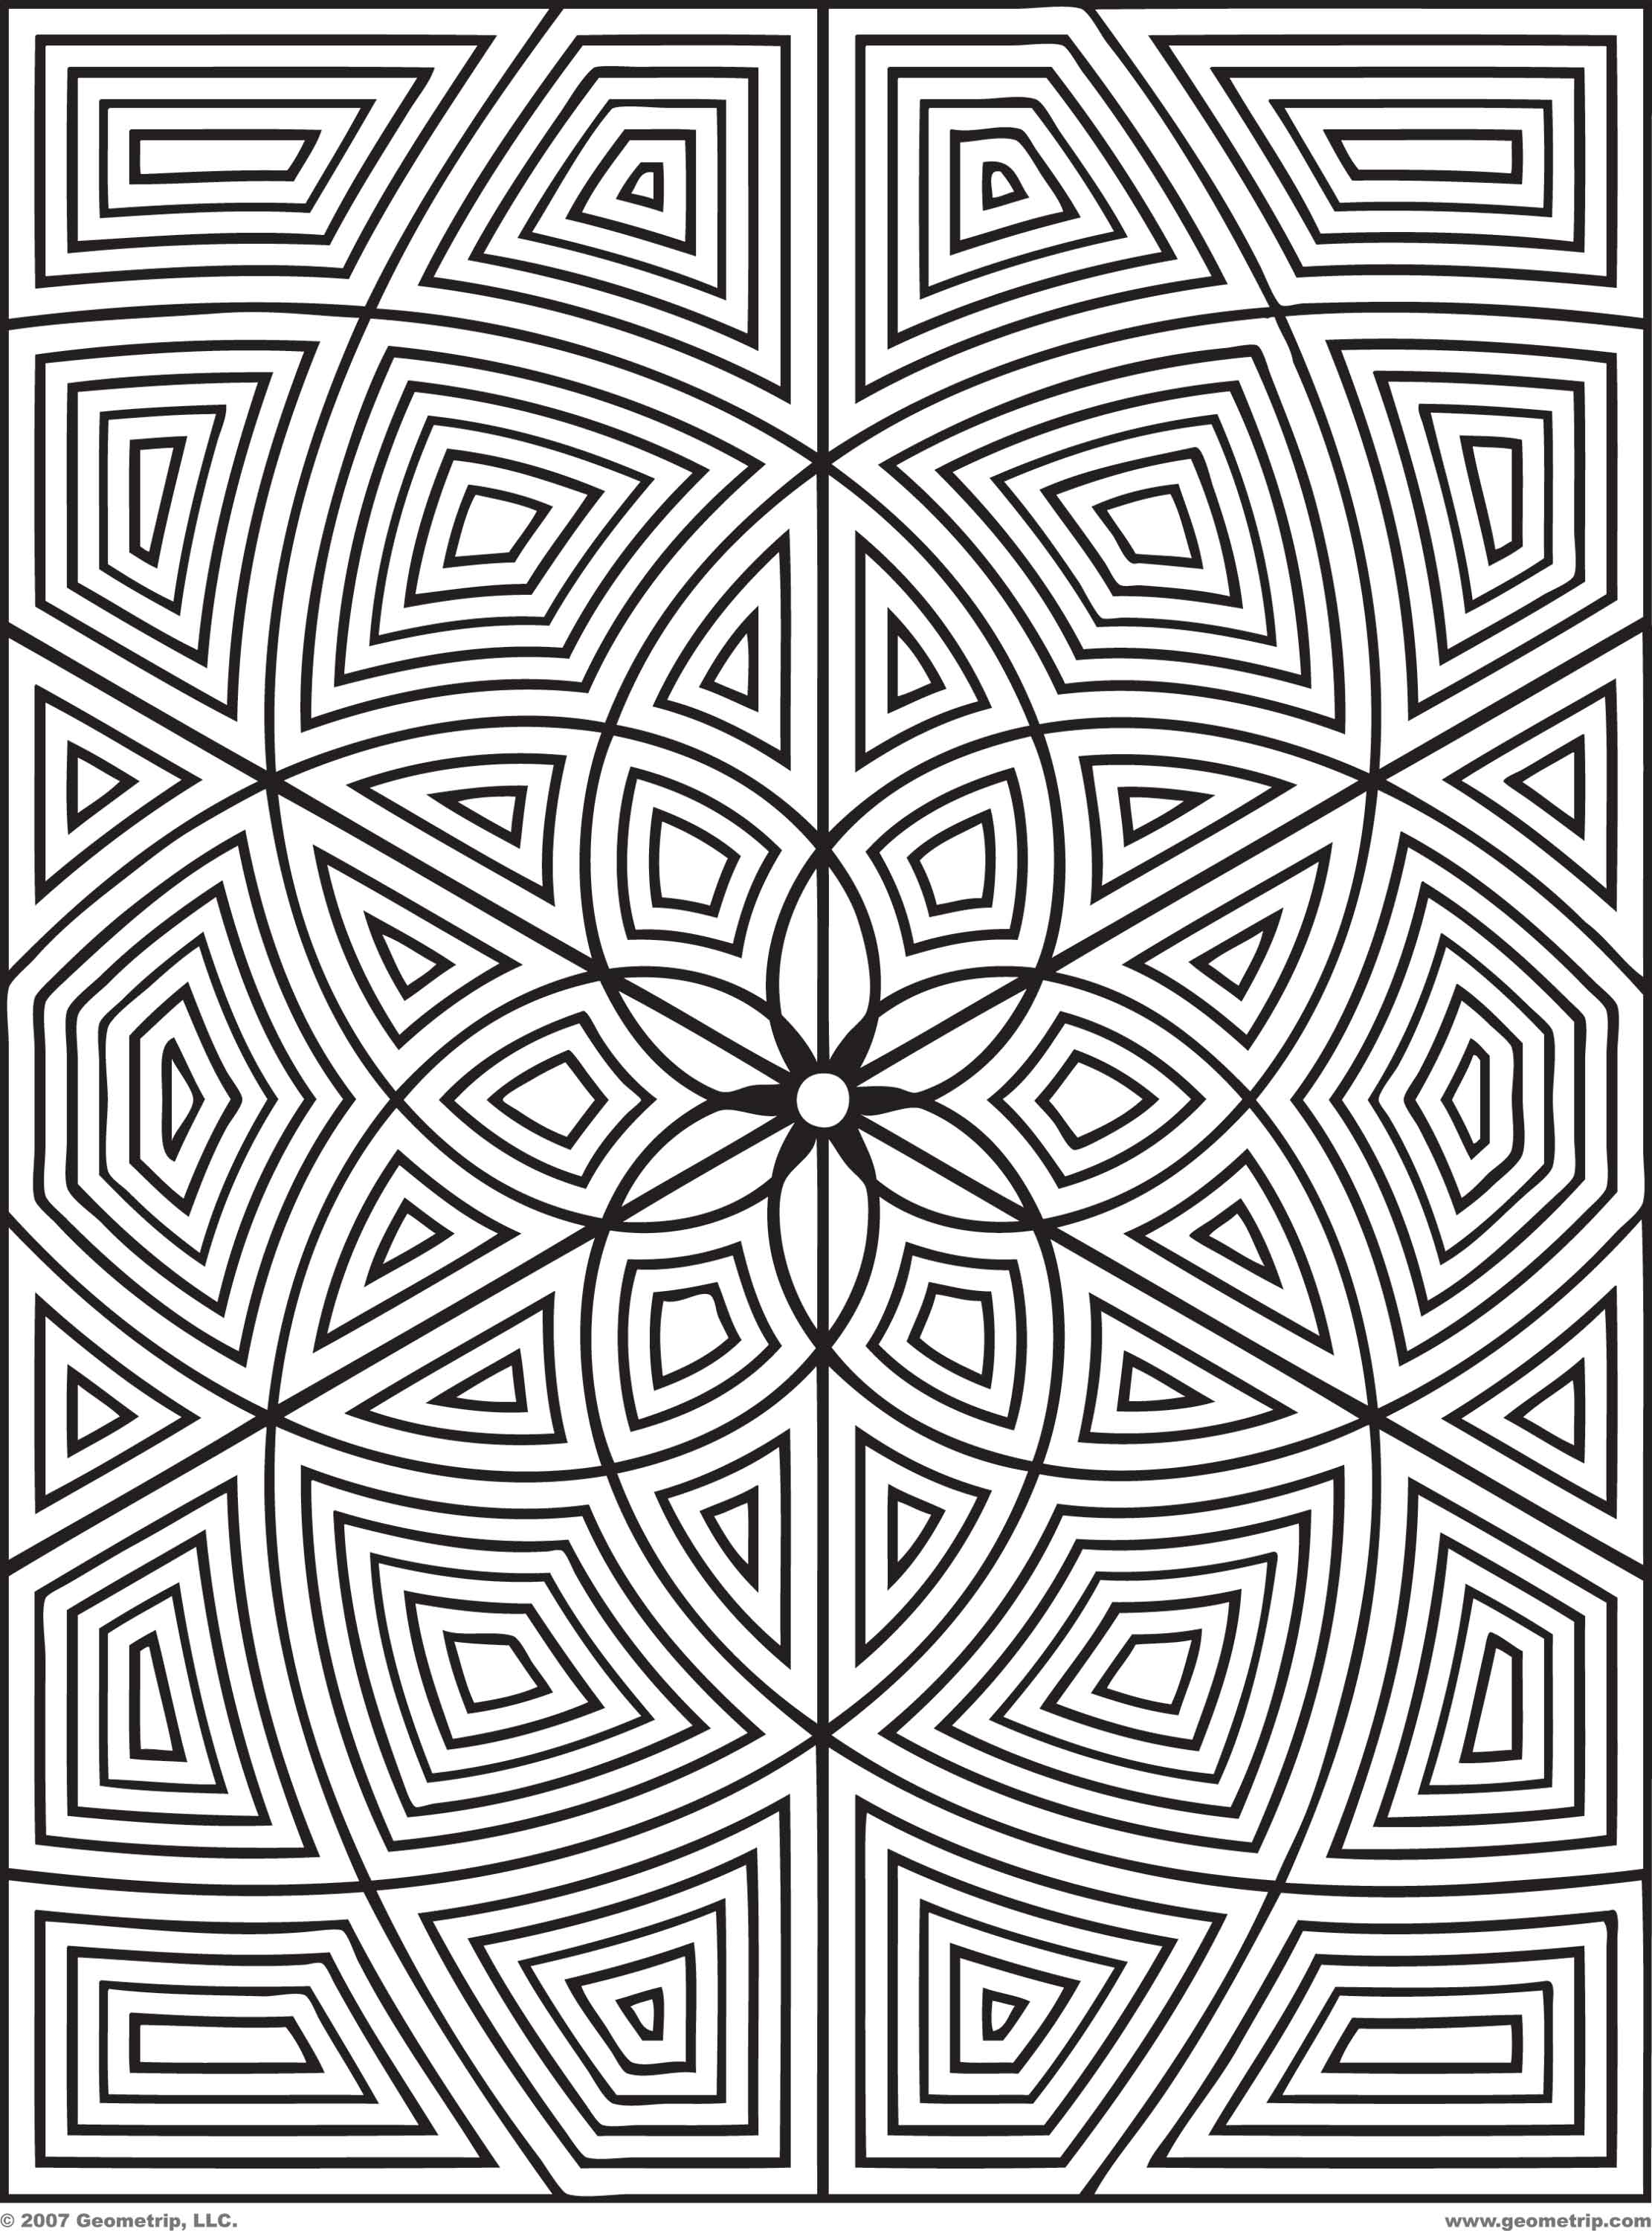 880 Simple Geometric Pattern Coloring Pages with Animal character